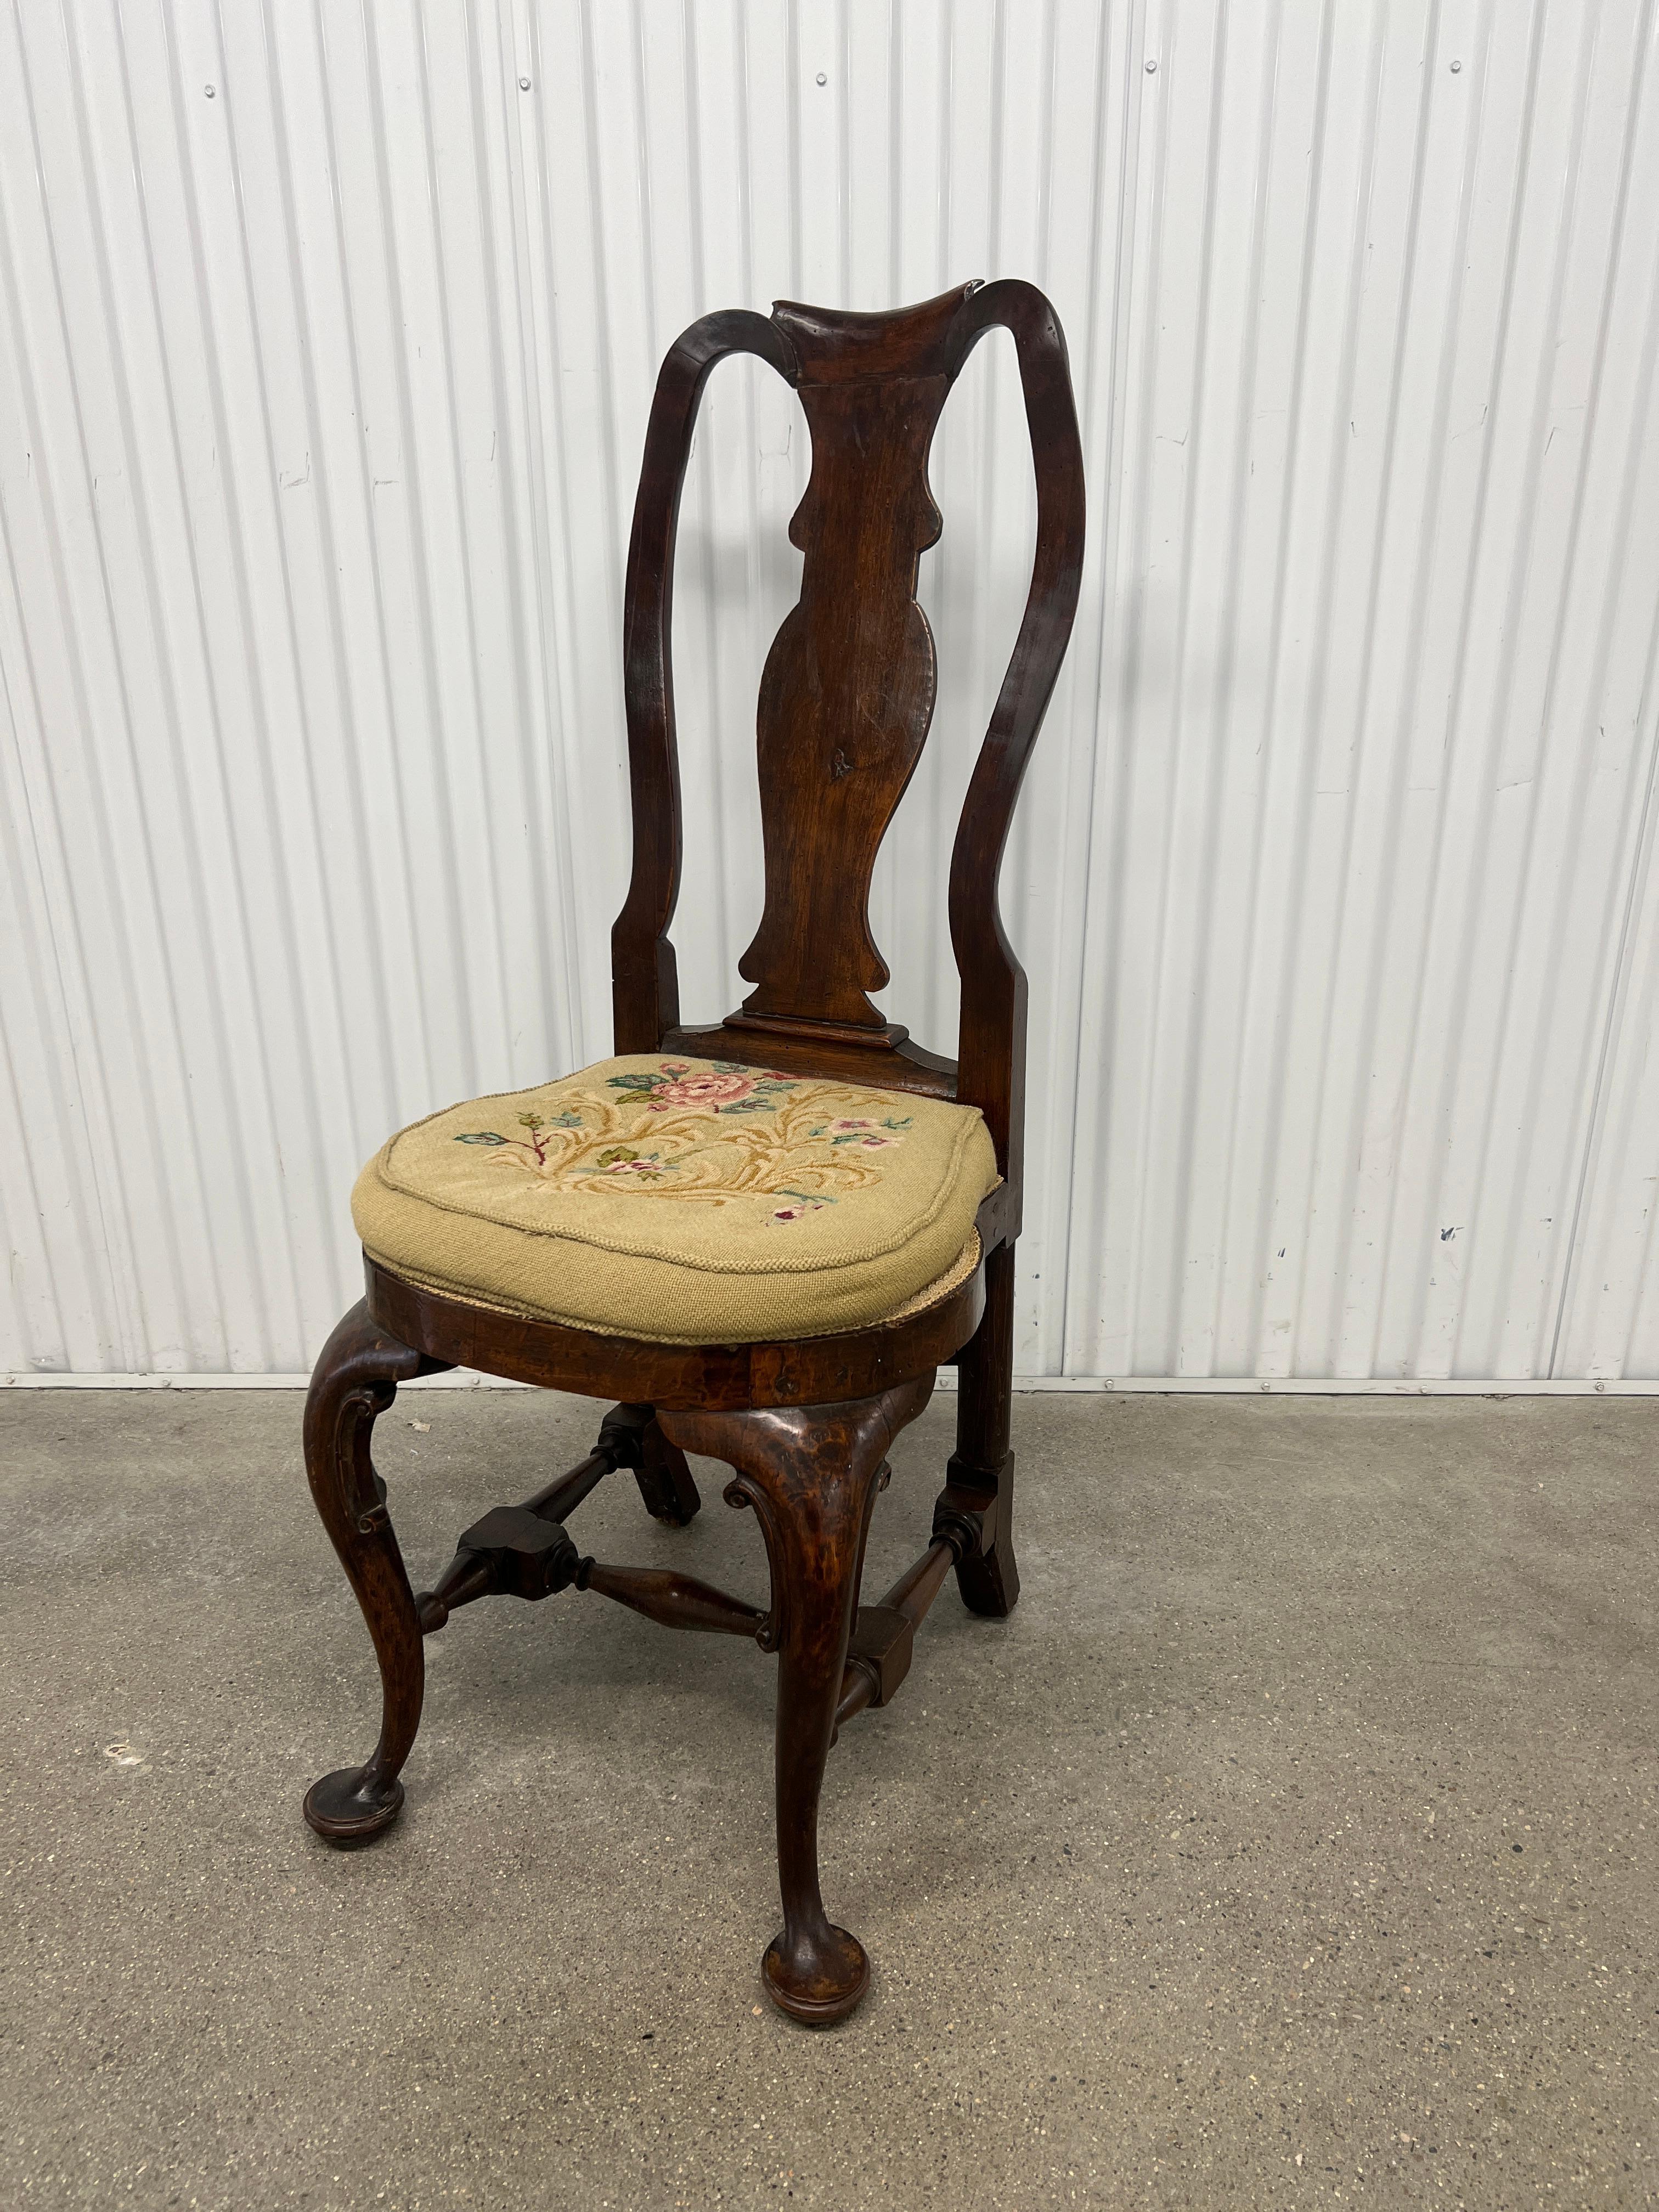 American or Bermuda, C. 18th century.

A highly important and unusual 18th century Queen Anne side chair. Featuring a shaped crest rail with fiddle back style splat and a shaped seat with scroll detailing to the cabriole legs with cutout rails